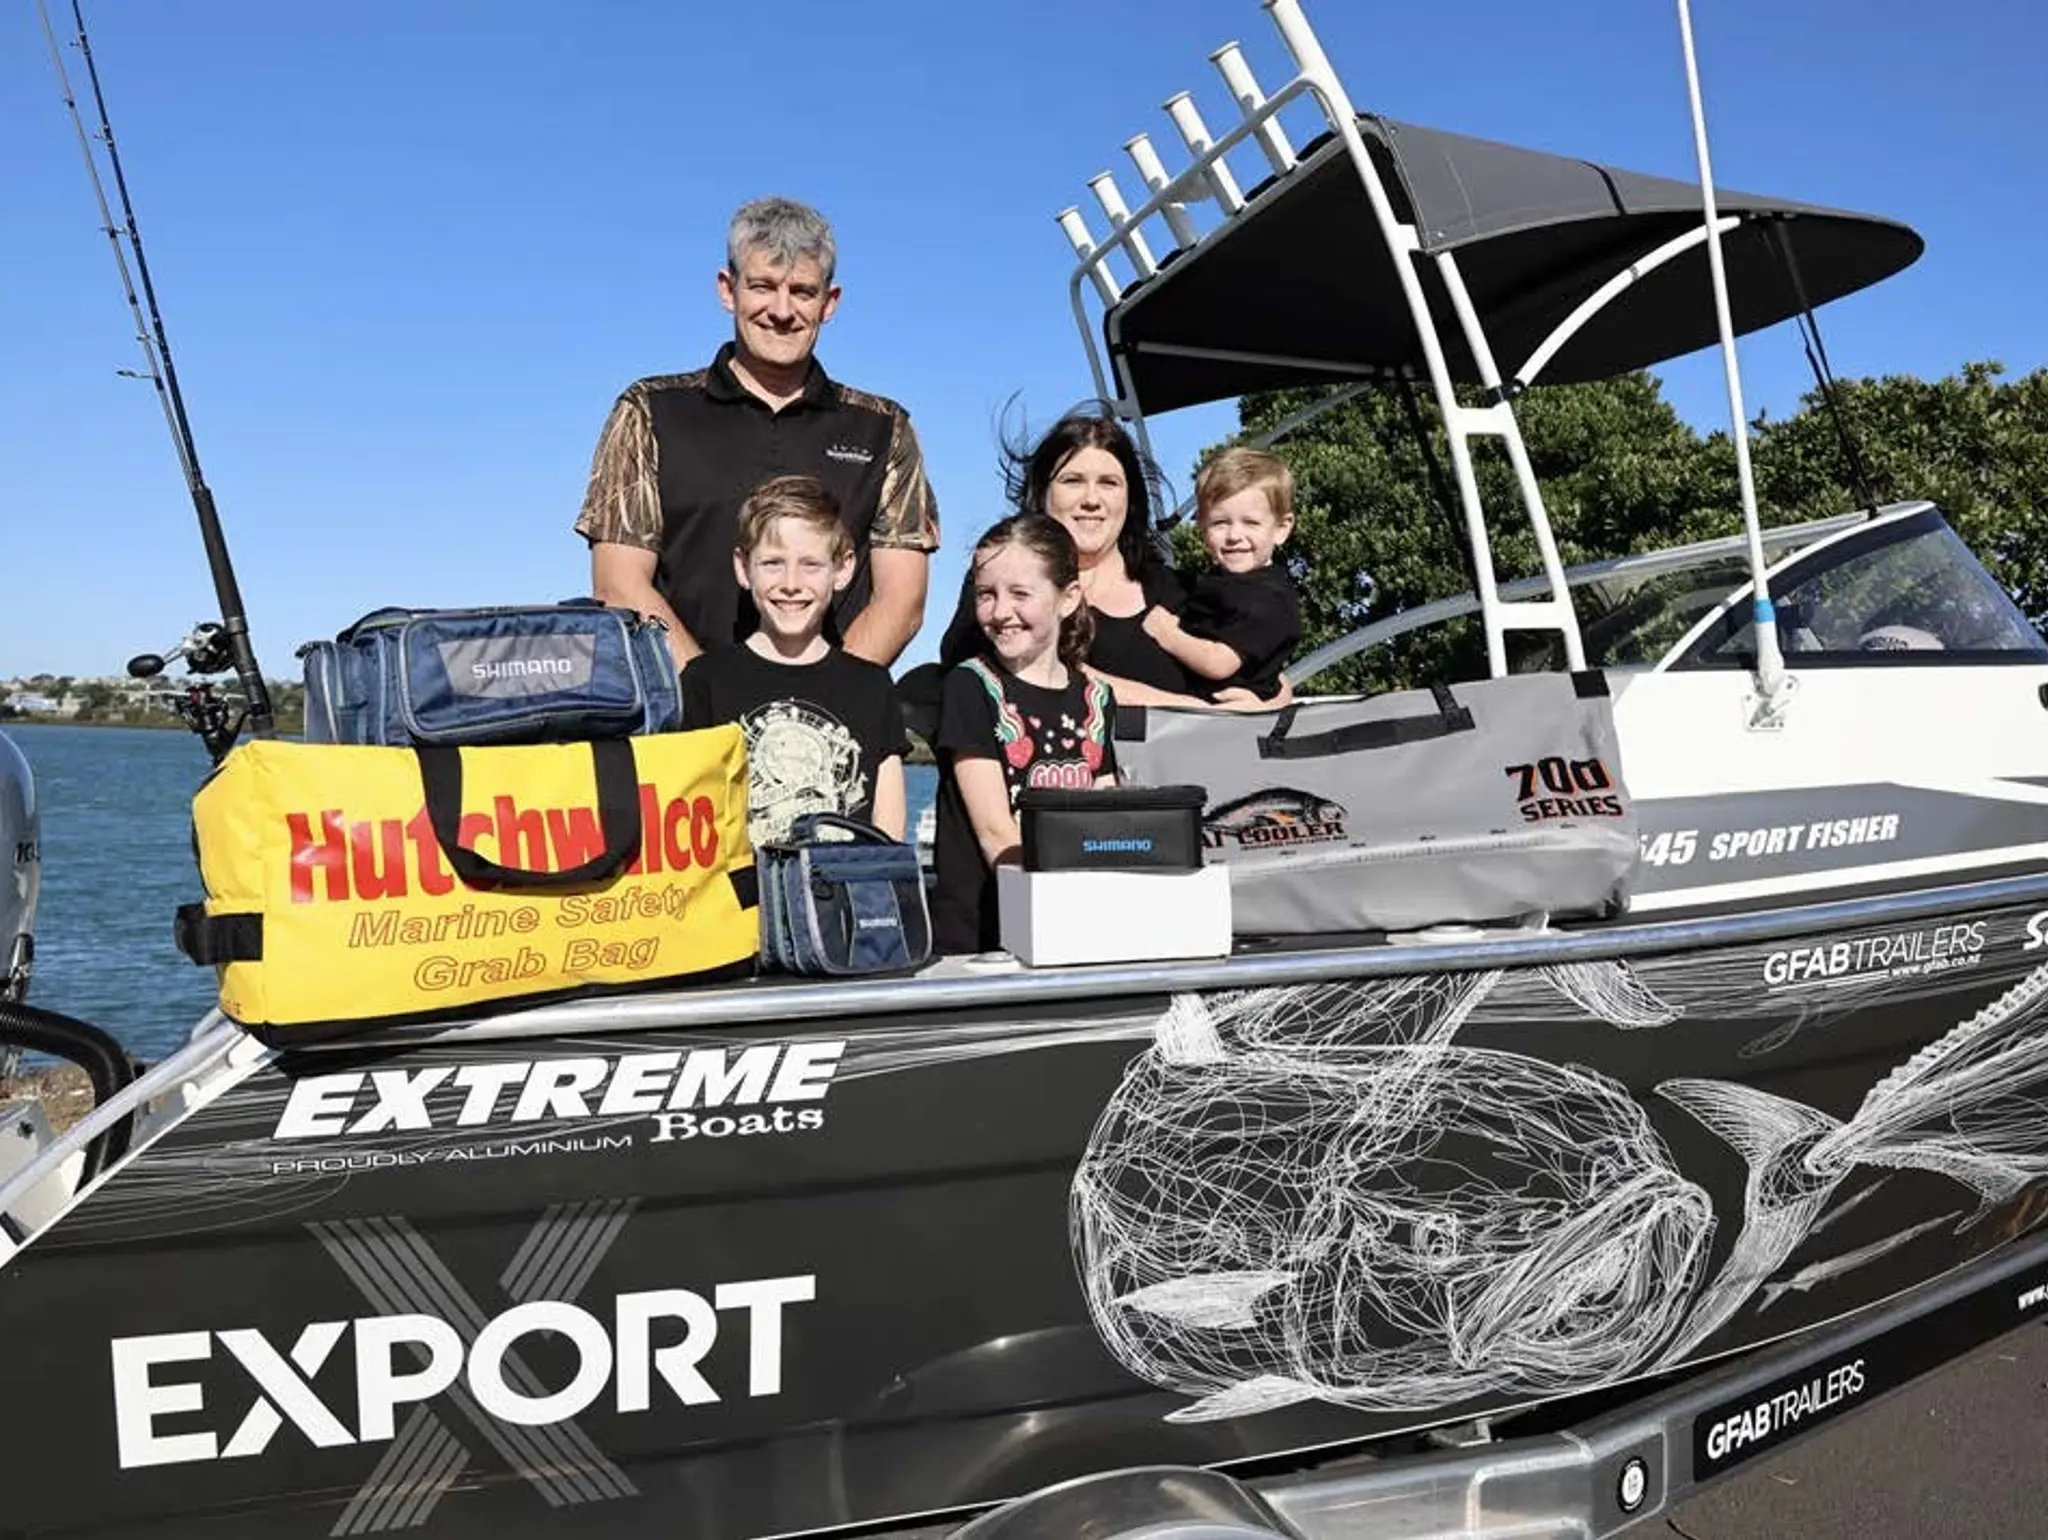 EXPORT PRIZE BOAT PUT TO GOOD USE